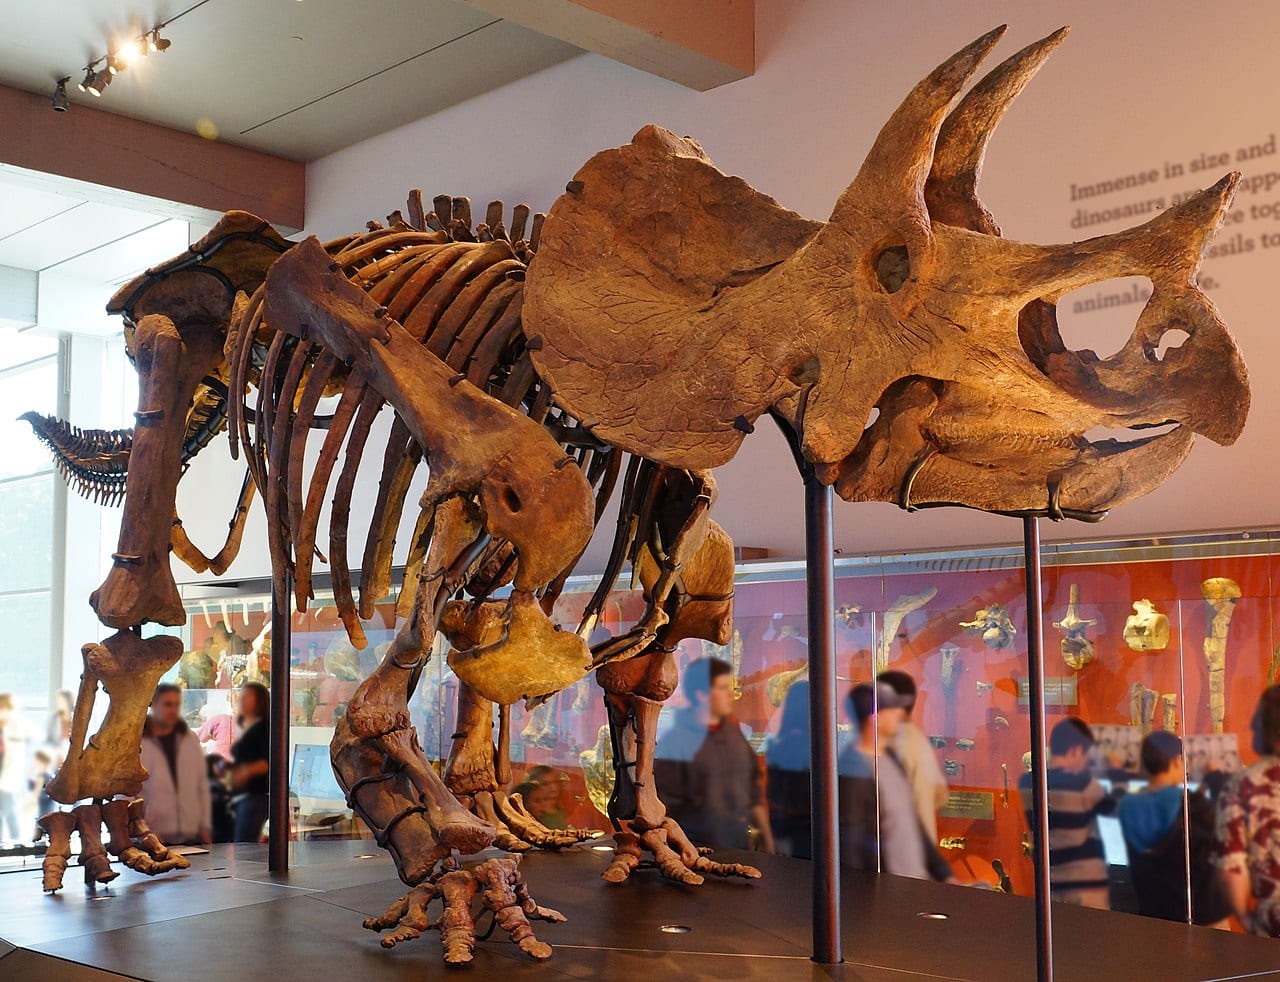 [Mounted statue of a Triceratops fossil at a museum. People can be seen in the background looking at a wall of fossils. ]